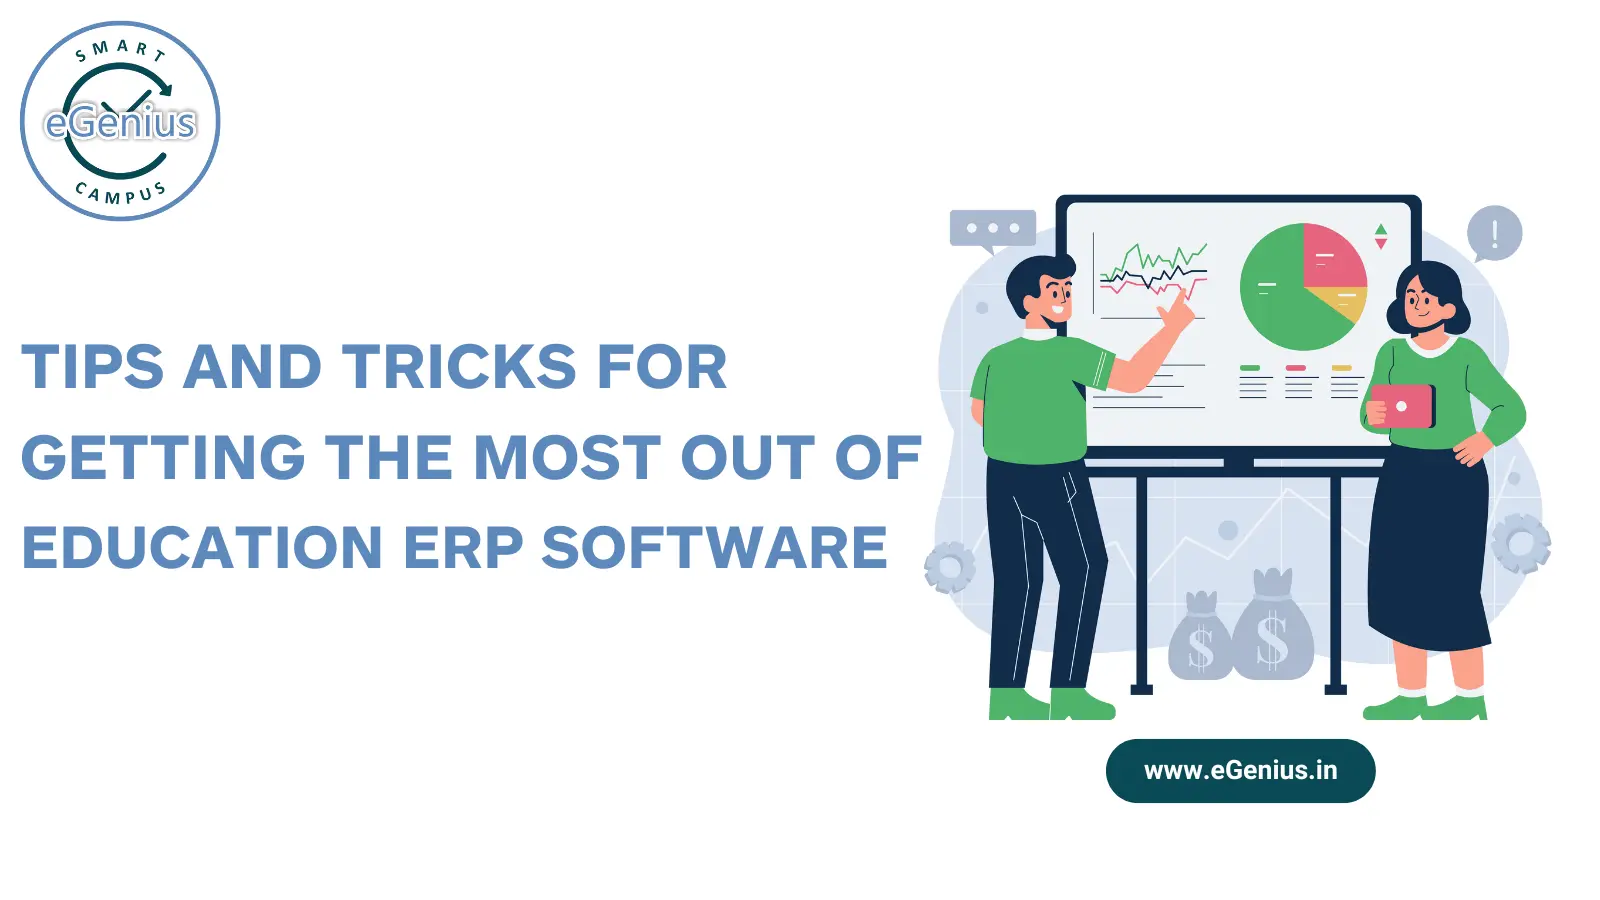 Tips and tricks for getting the most out of Education ERP software. 